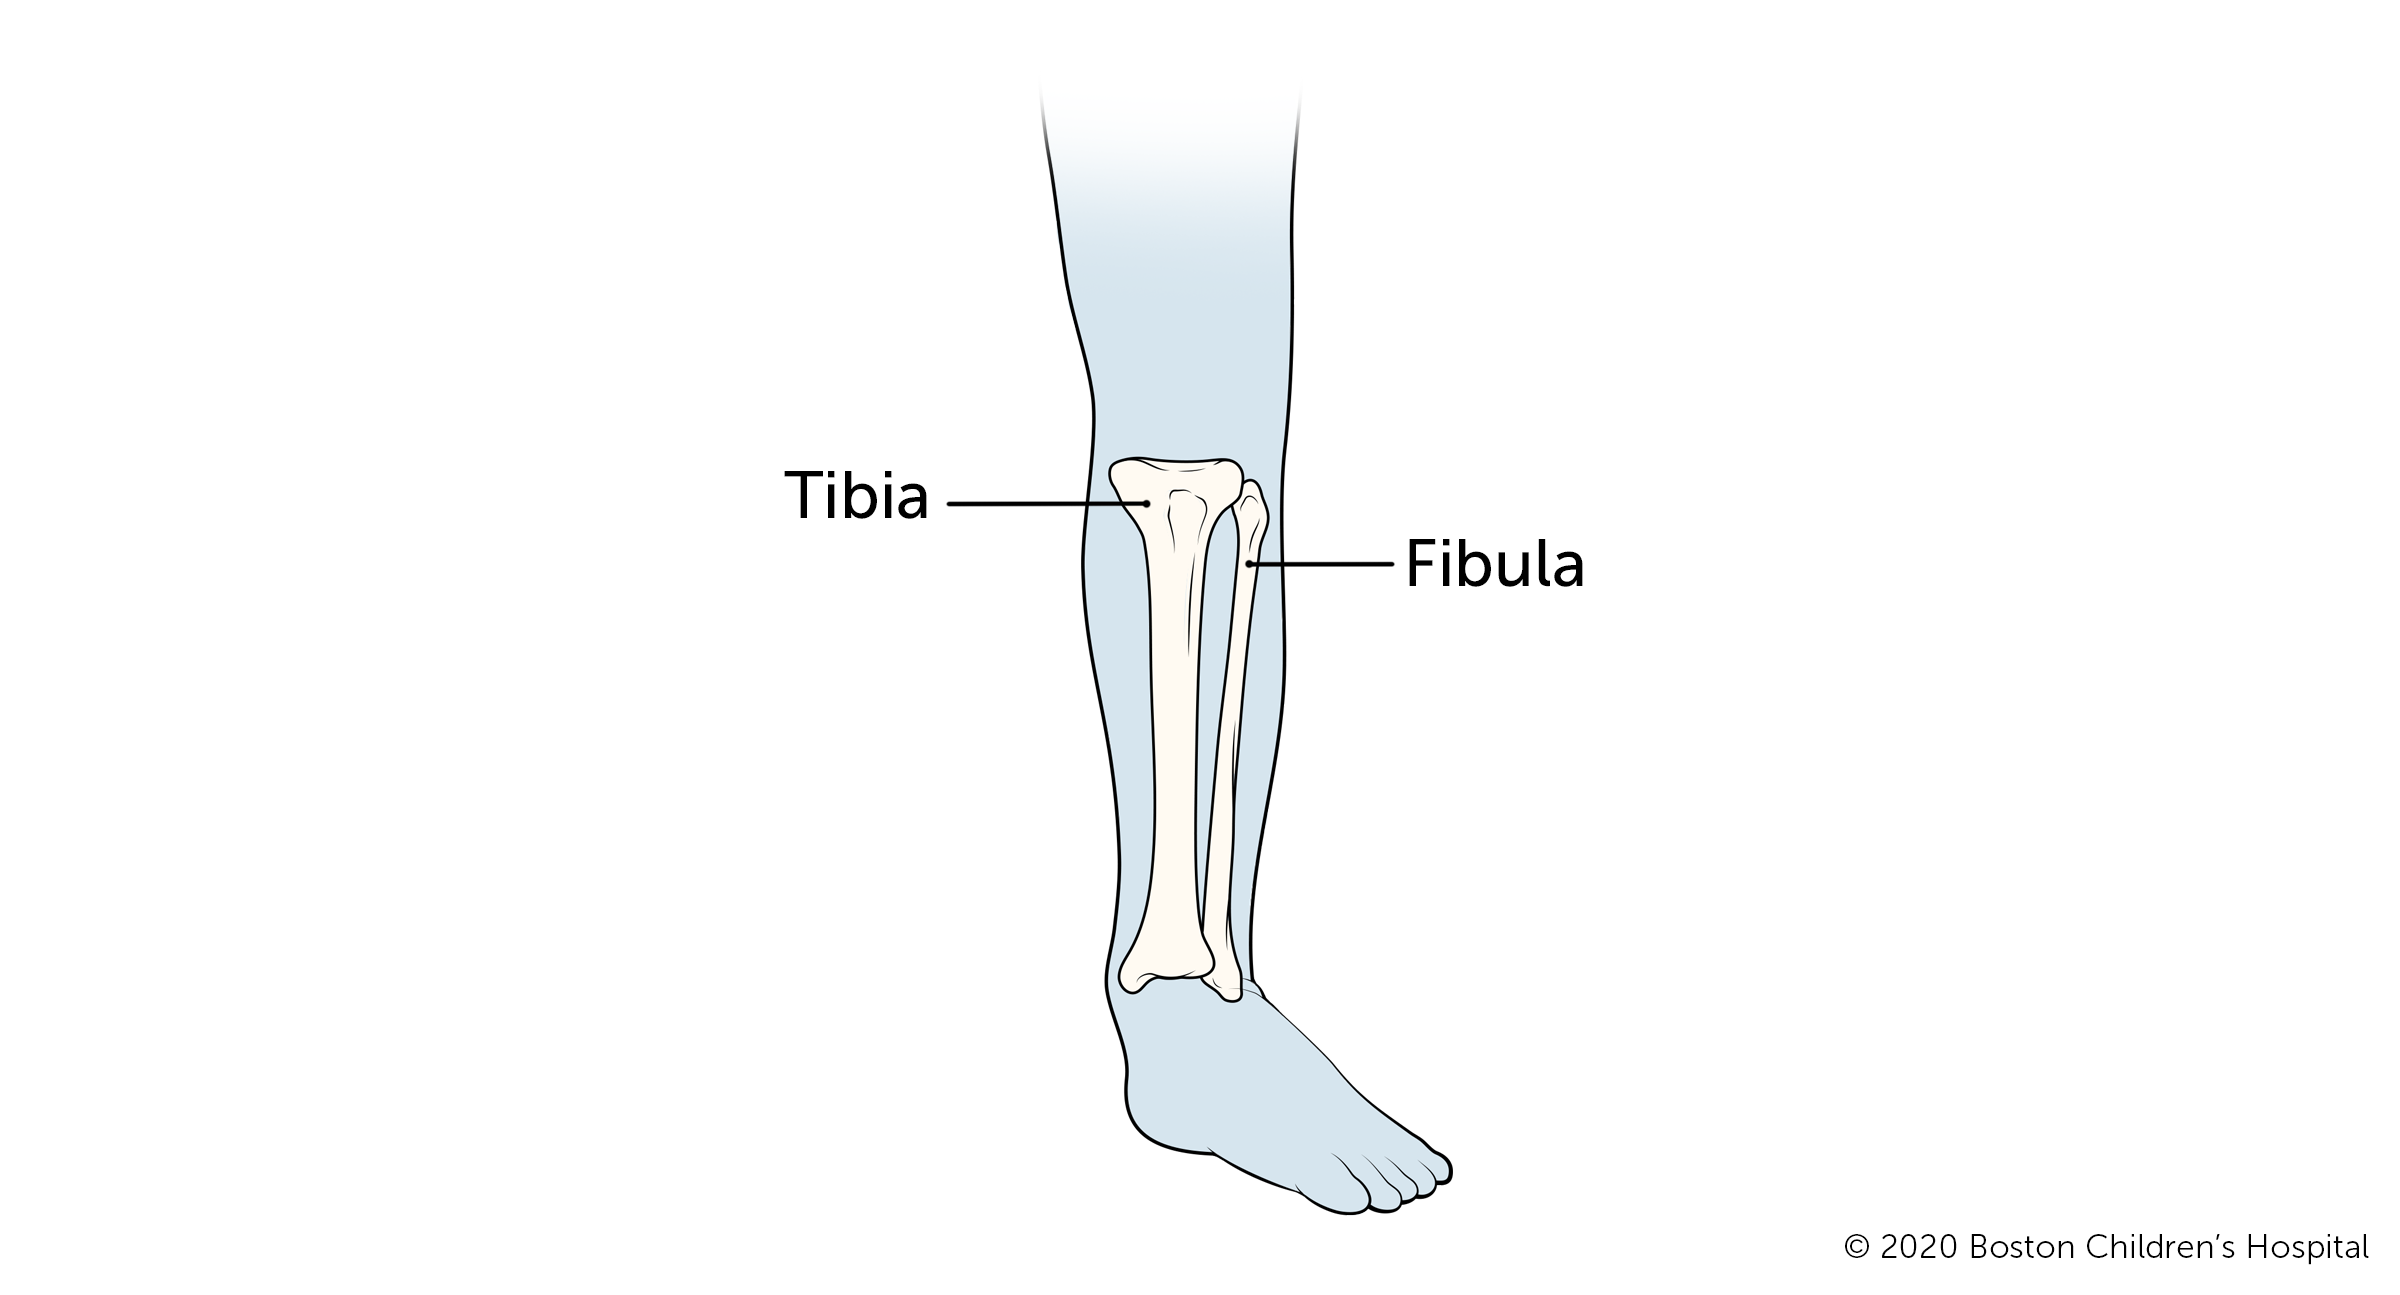 Here is a view of the tibia and the fibula.